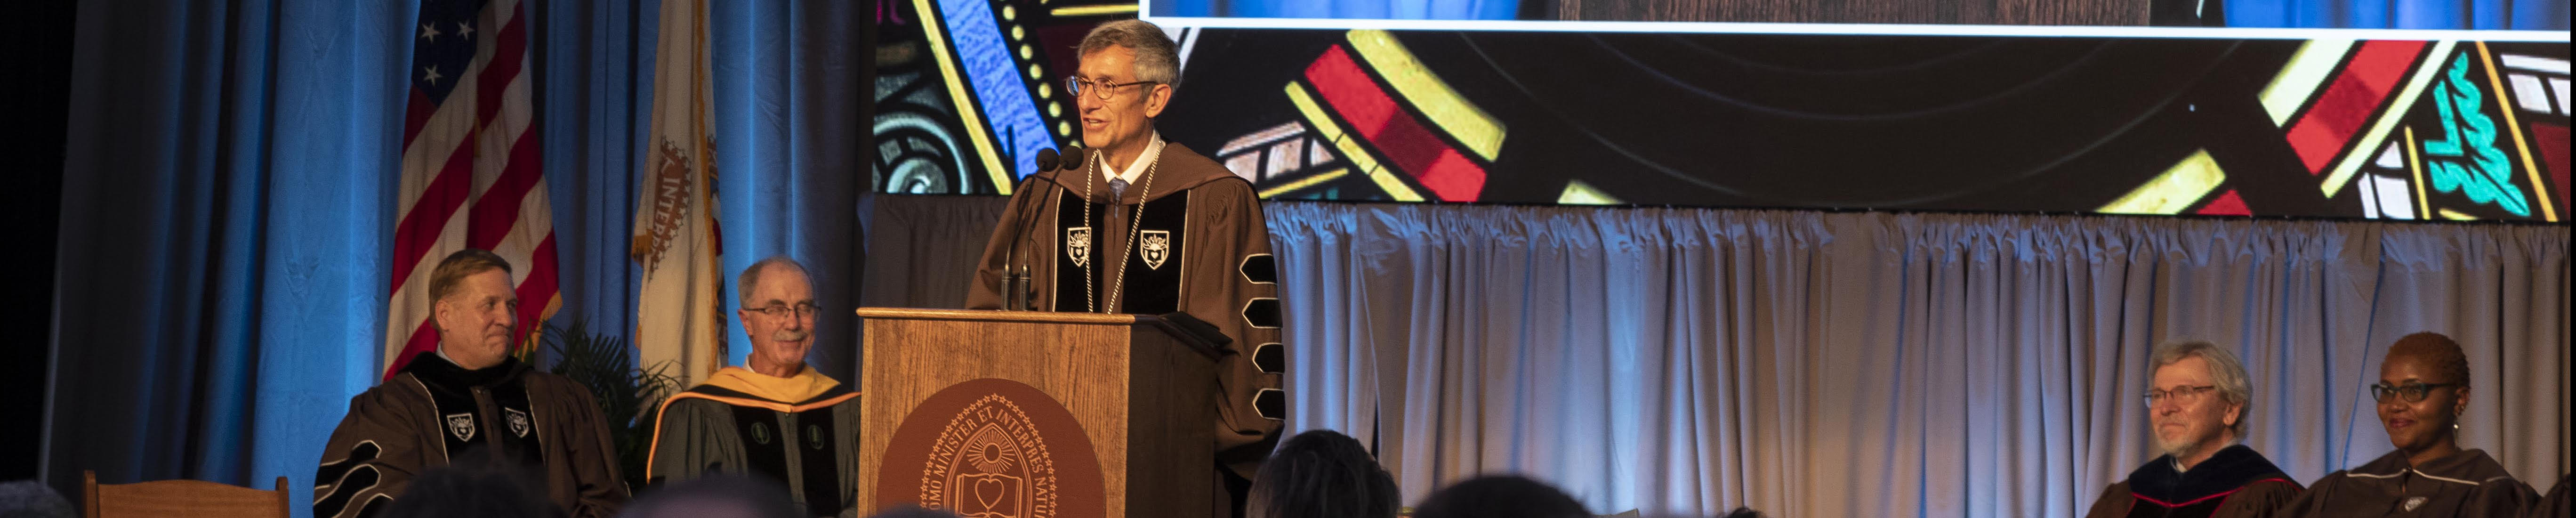 Joseph J. Helble was officially inaugurated as Lehigh's 15th president on Oct. 15.